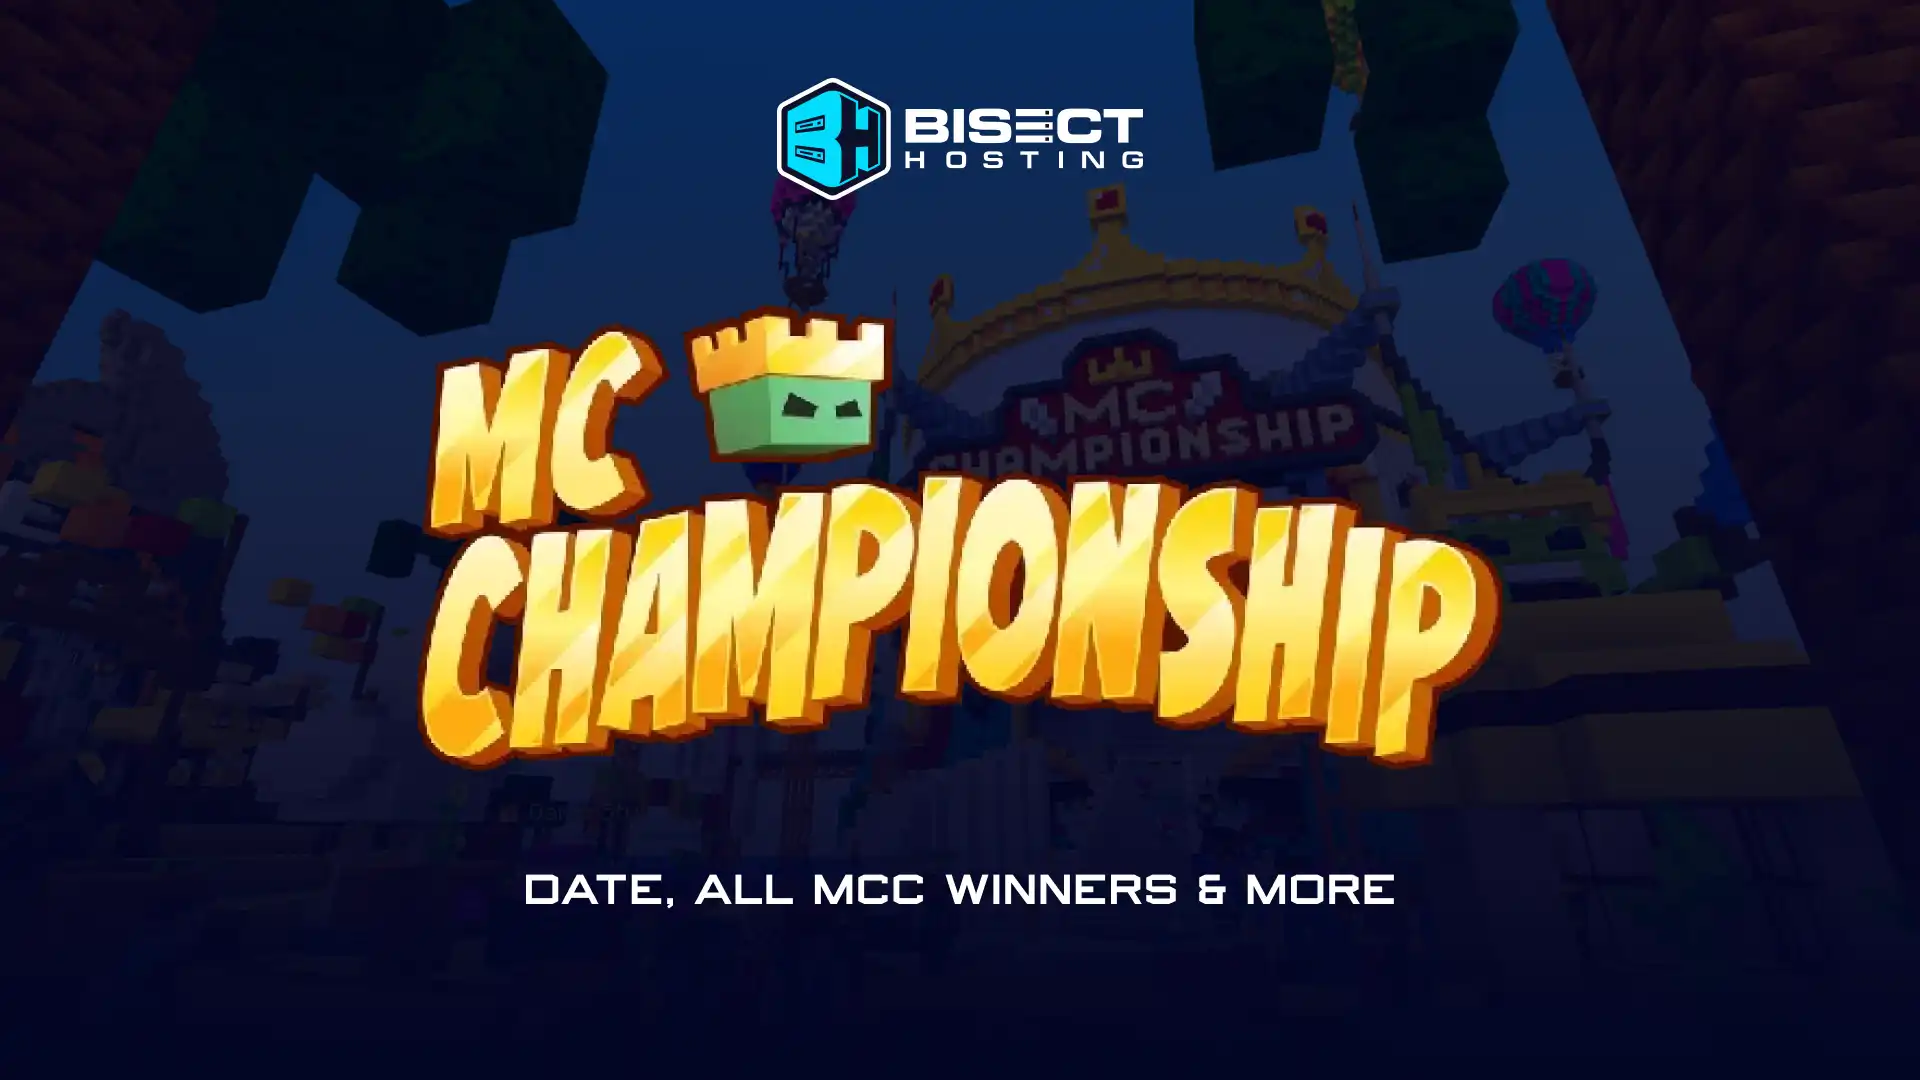 MCC Party Announced – Date, All MCC Winners, & More